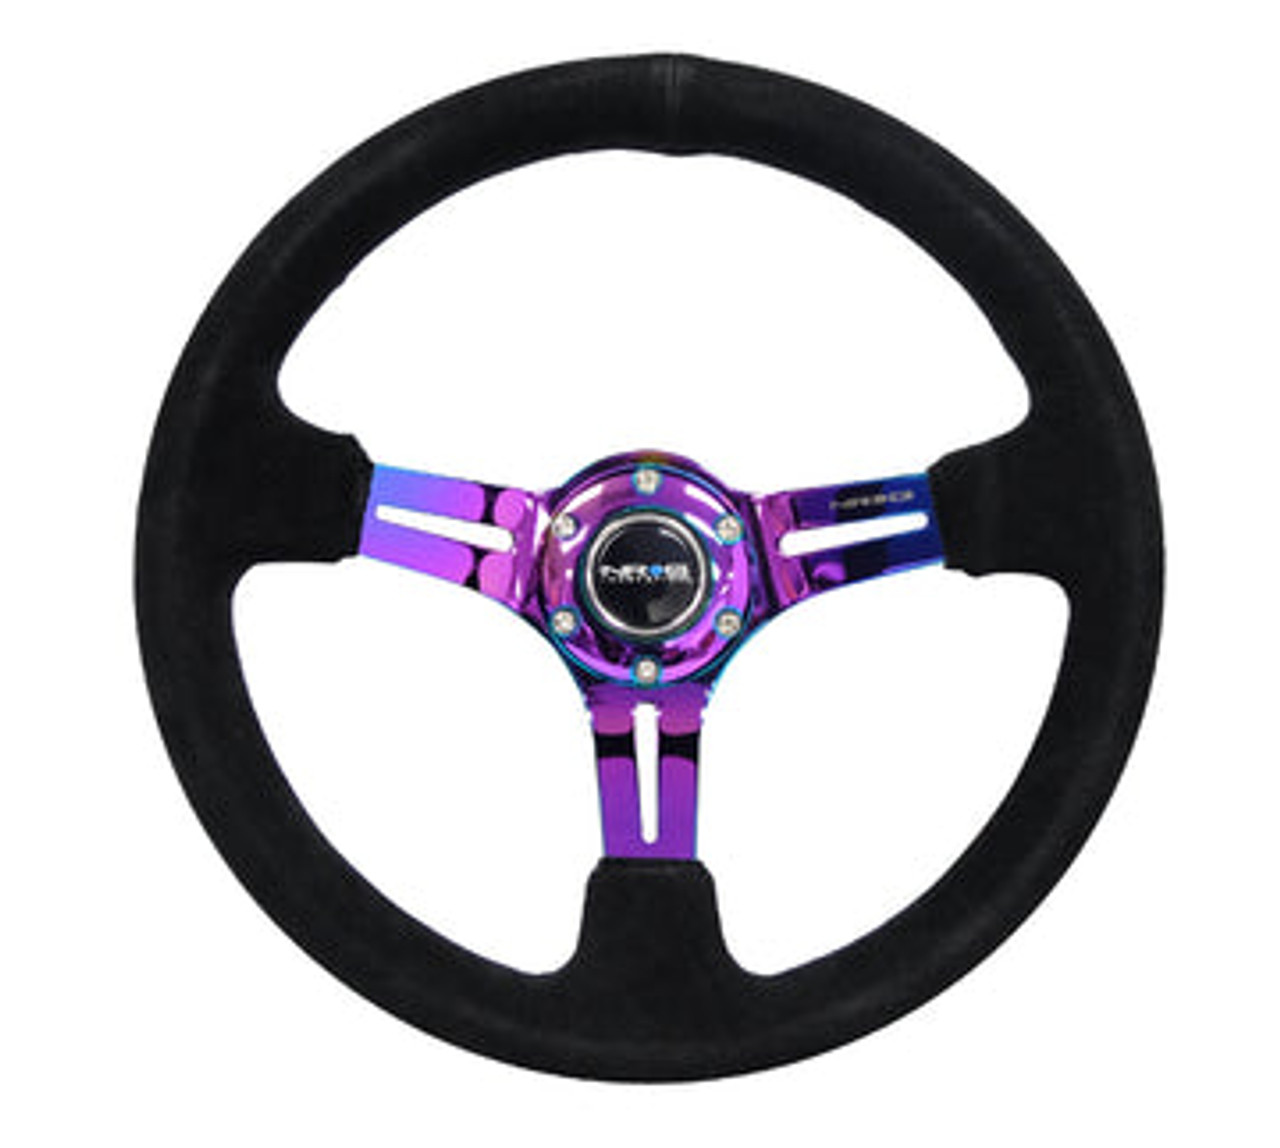 Stiching 350mm NRG Steering Wheel 3" Deep Dish Red Suede with Black Stitch